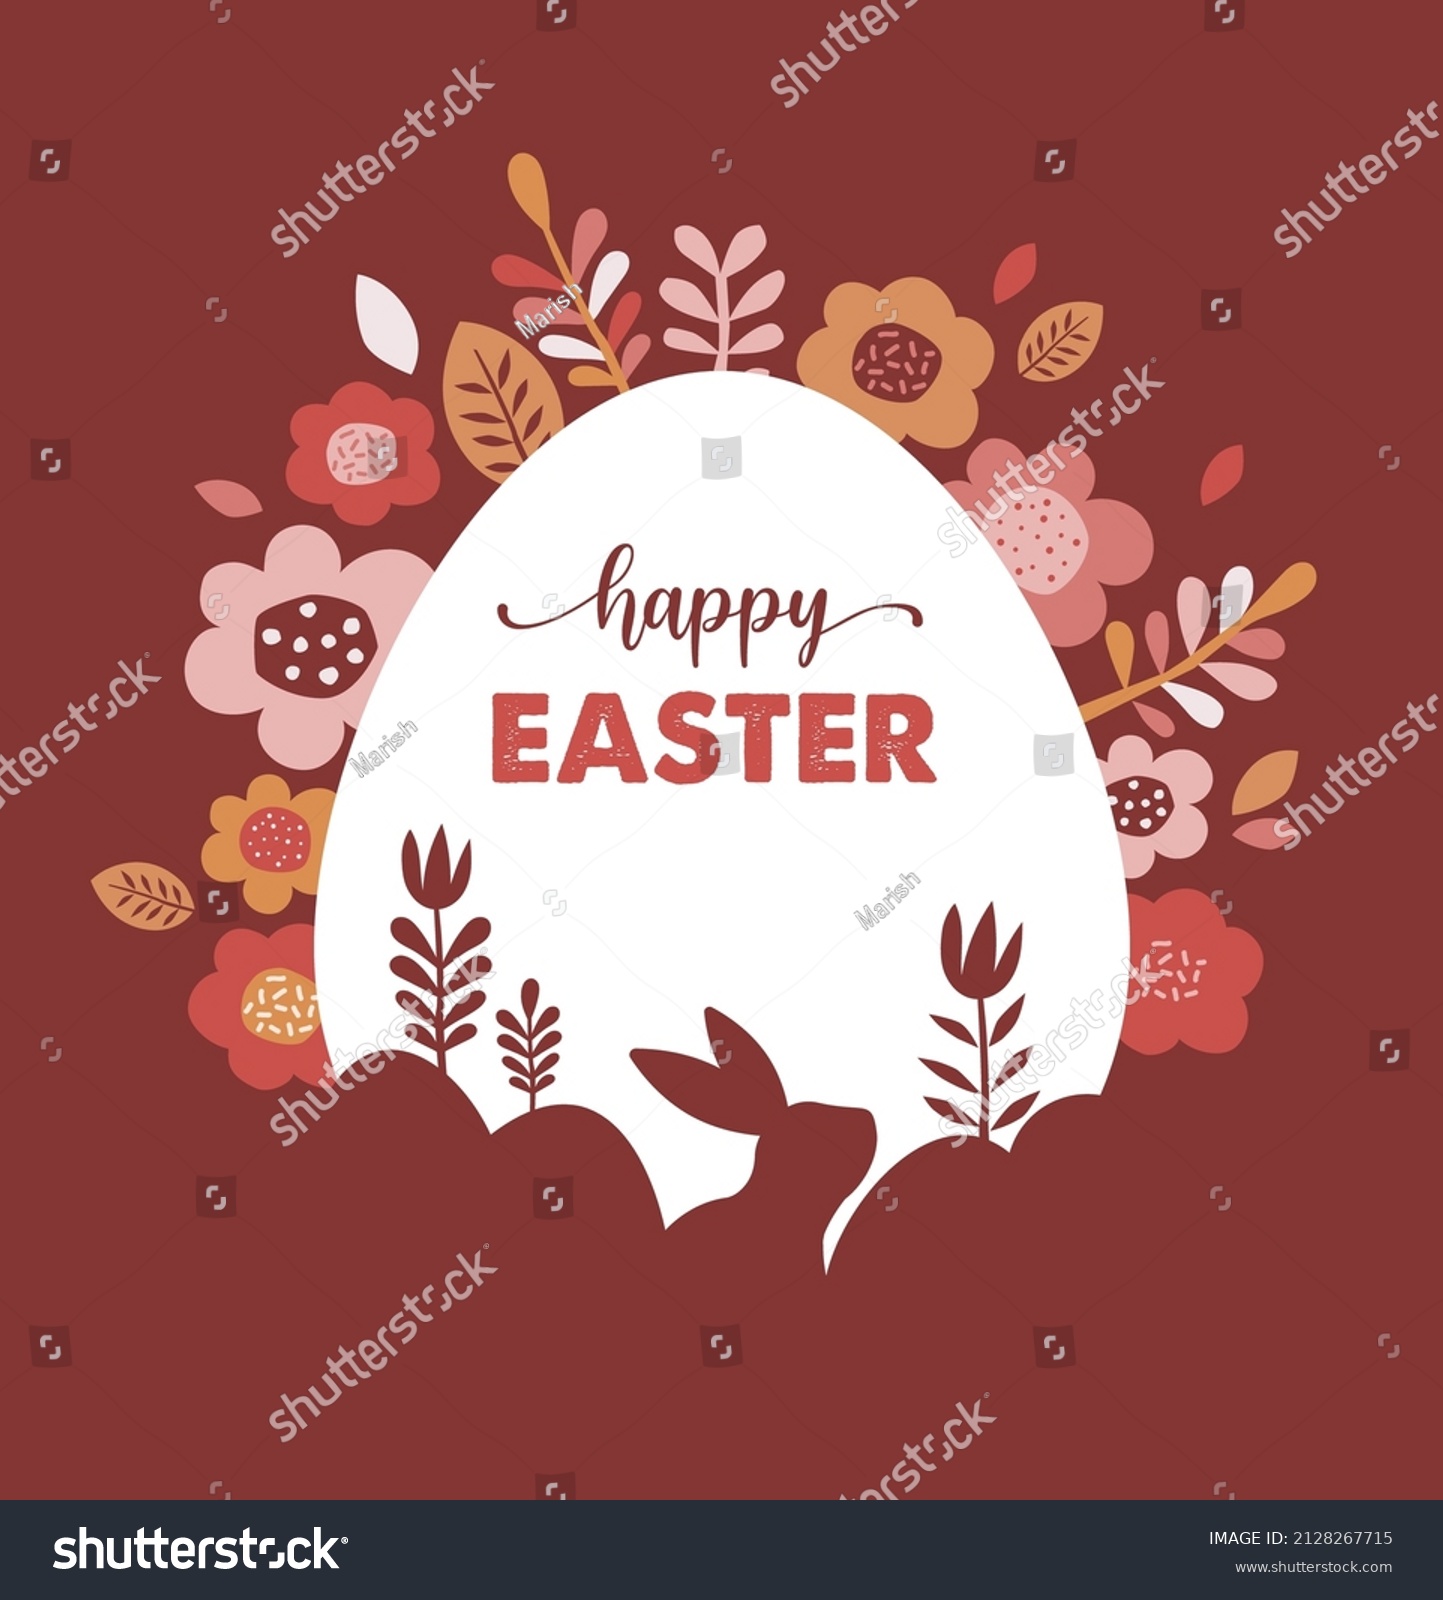 Happy Easter banner, poster, greeting card. Trendy Easter design with typography, bunnies, flowers, eggs, bunny ears, in pastel colors. Modern minimal style #2128267715